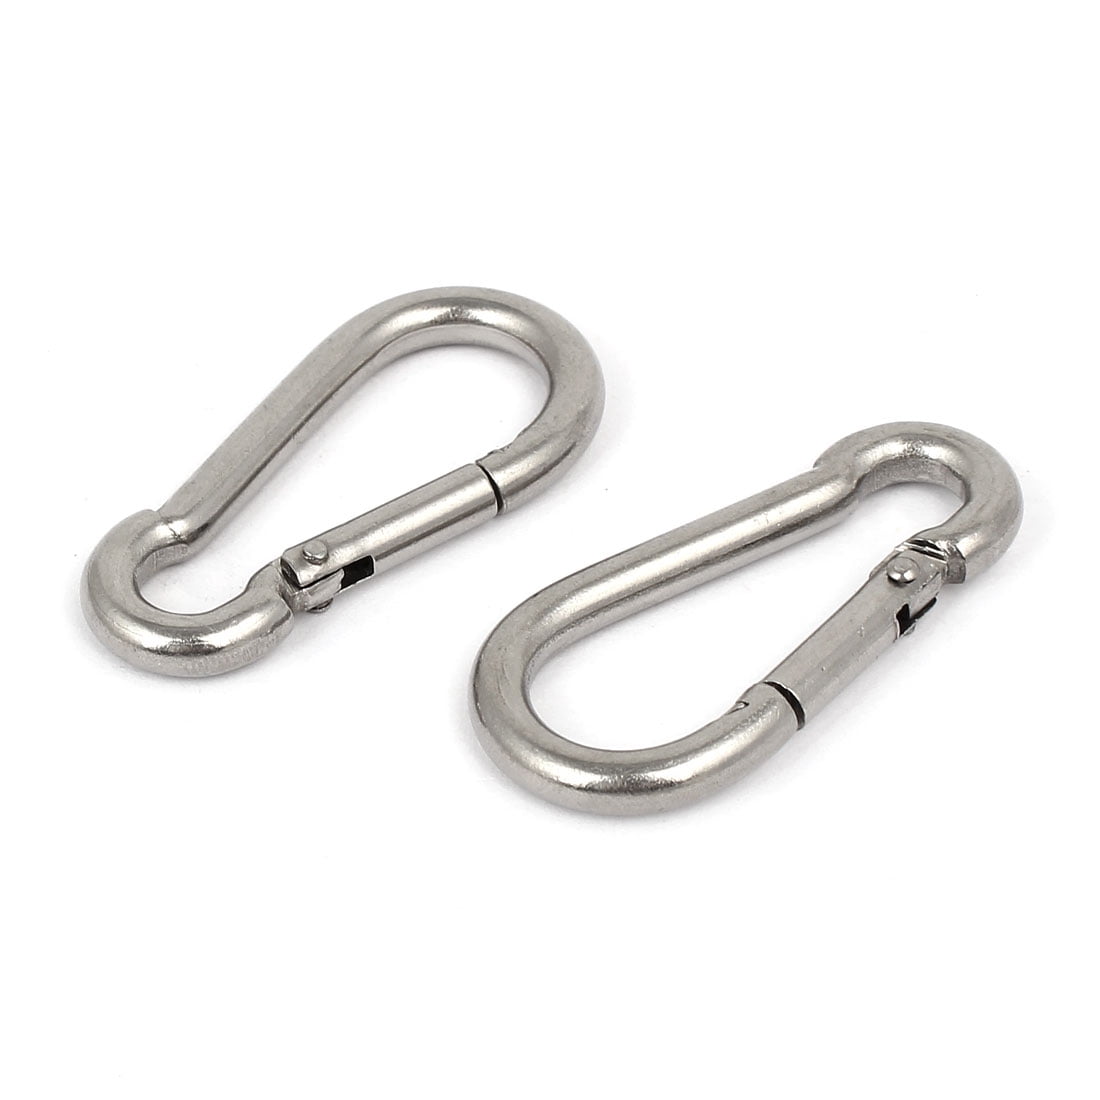 50pcs Carabiner Spring Snap Hook Clip M5 50mm 304 Stainless Steel 